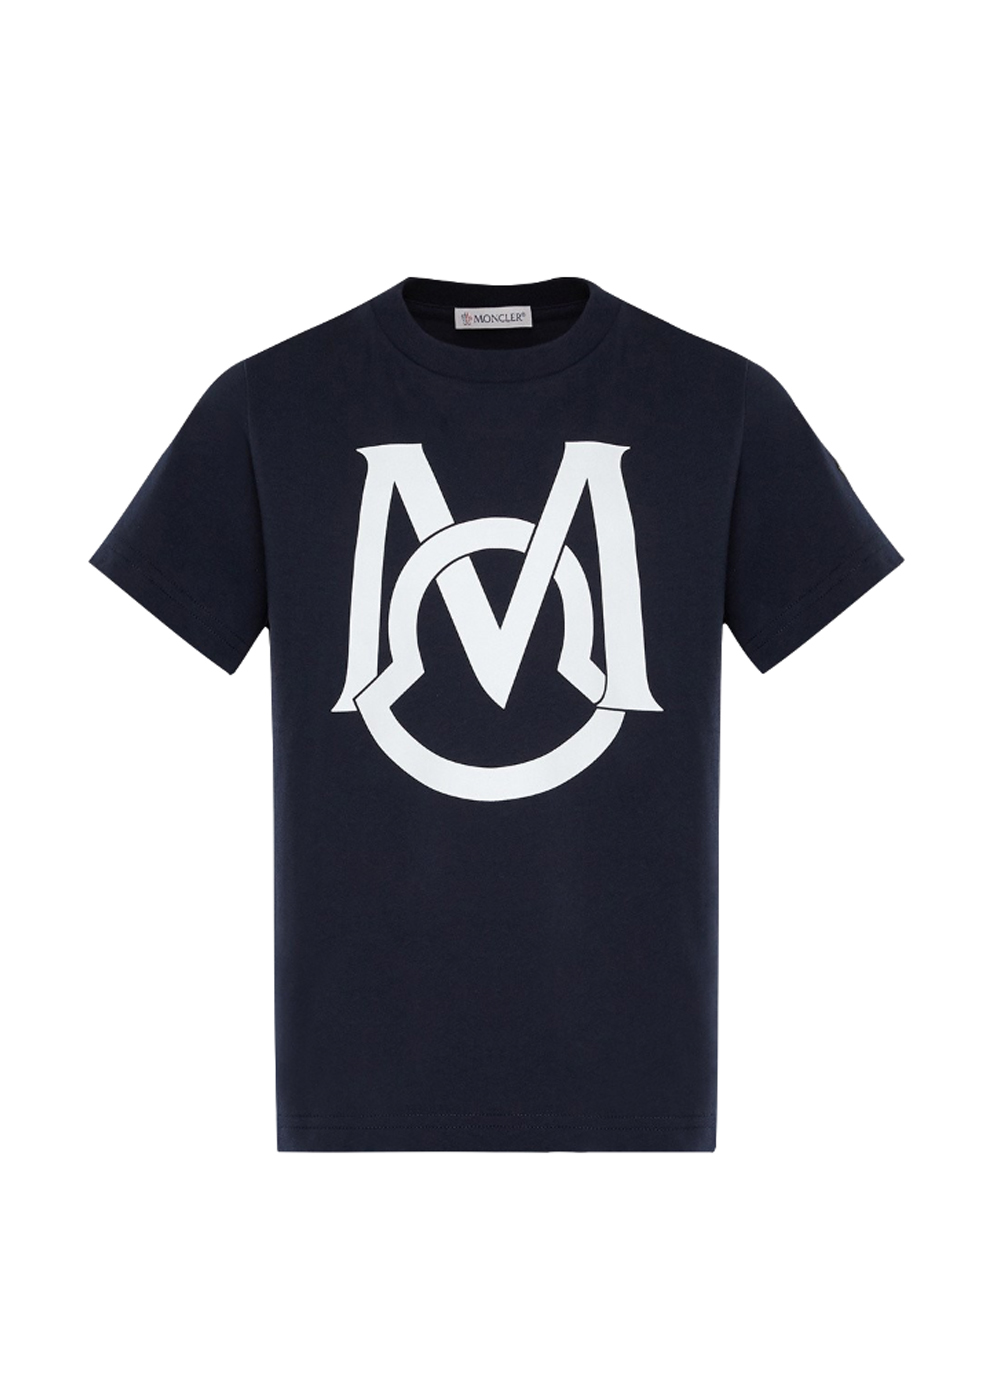 Featured image for “Moncler T-shirt Logo”